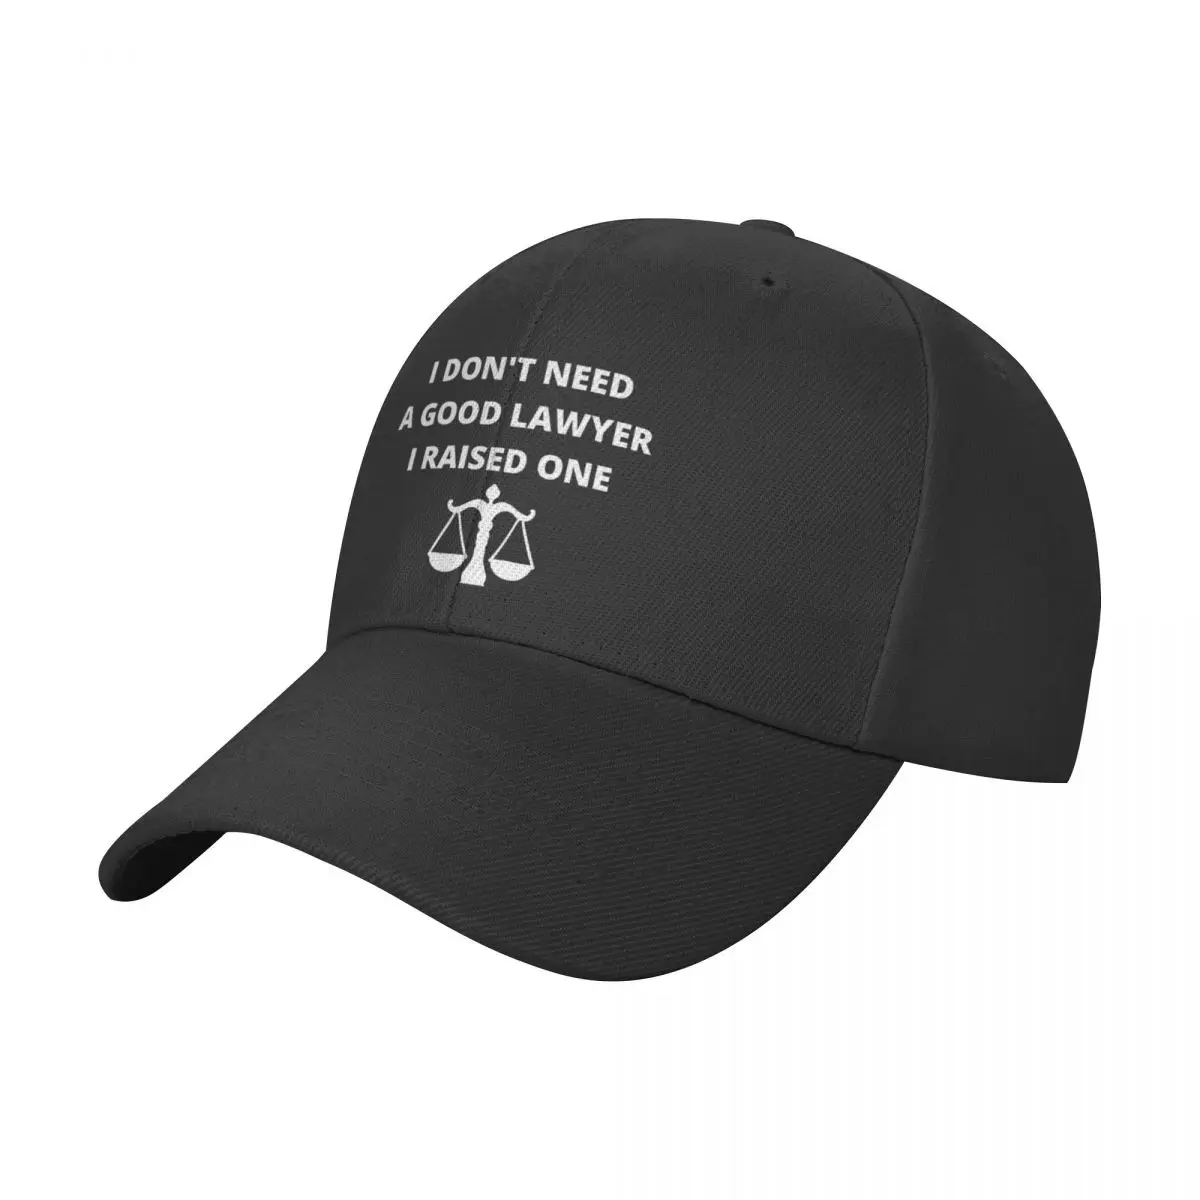 

I Dont Need A Good Lawyer, I Raised One - Mom, Dad of Lawyer Baseball Cap Big Size Hat Beach party Hat Hats For Women Men's